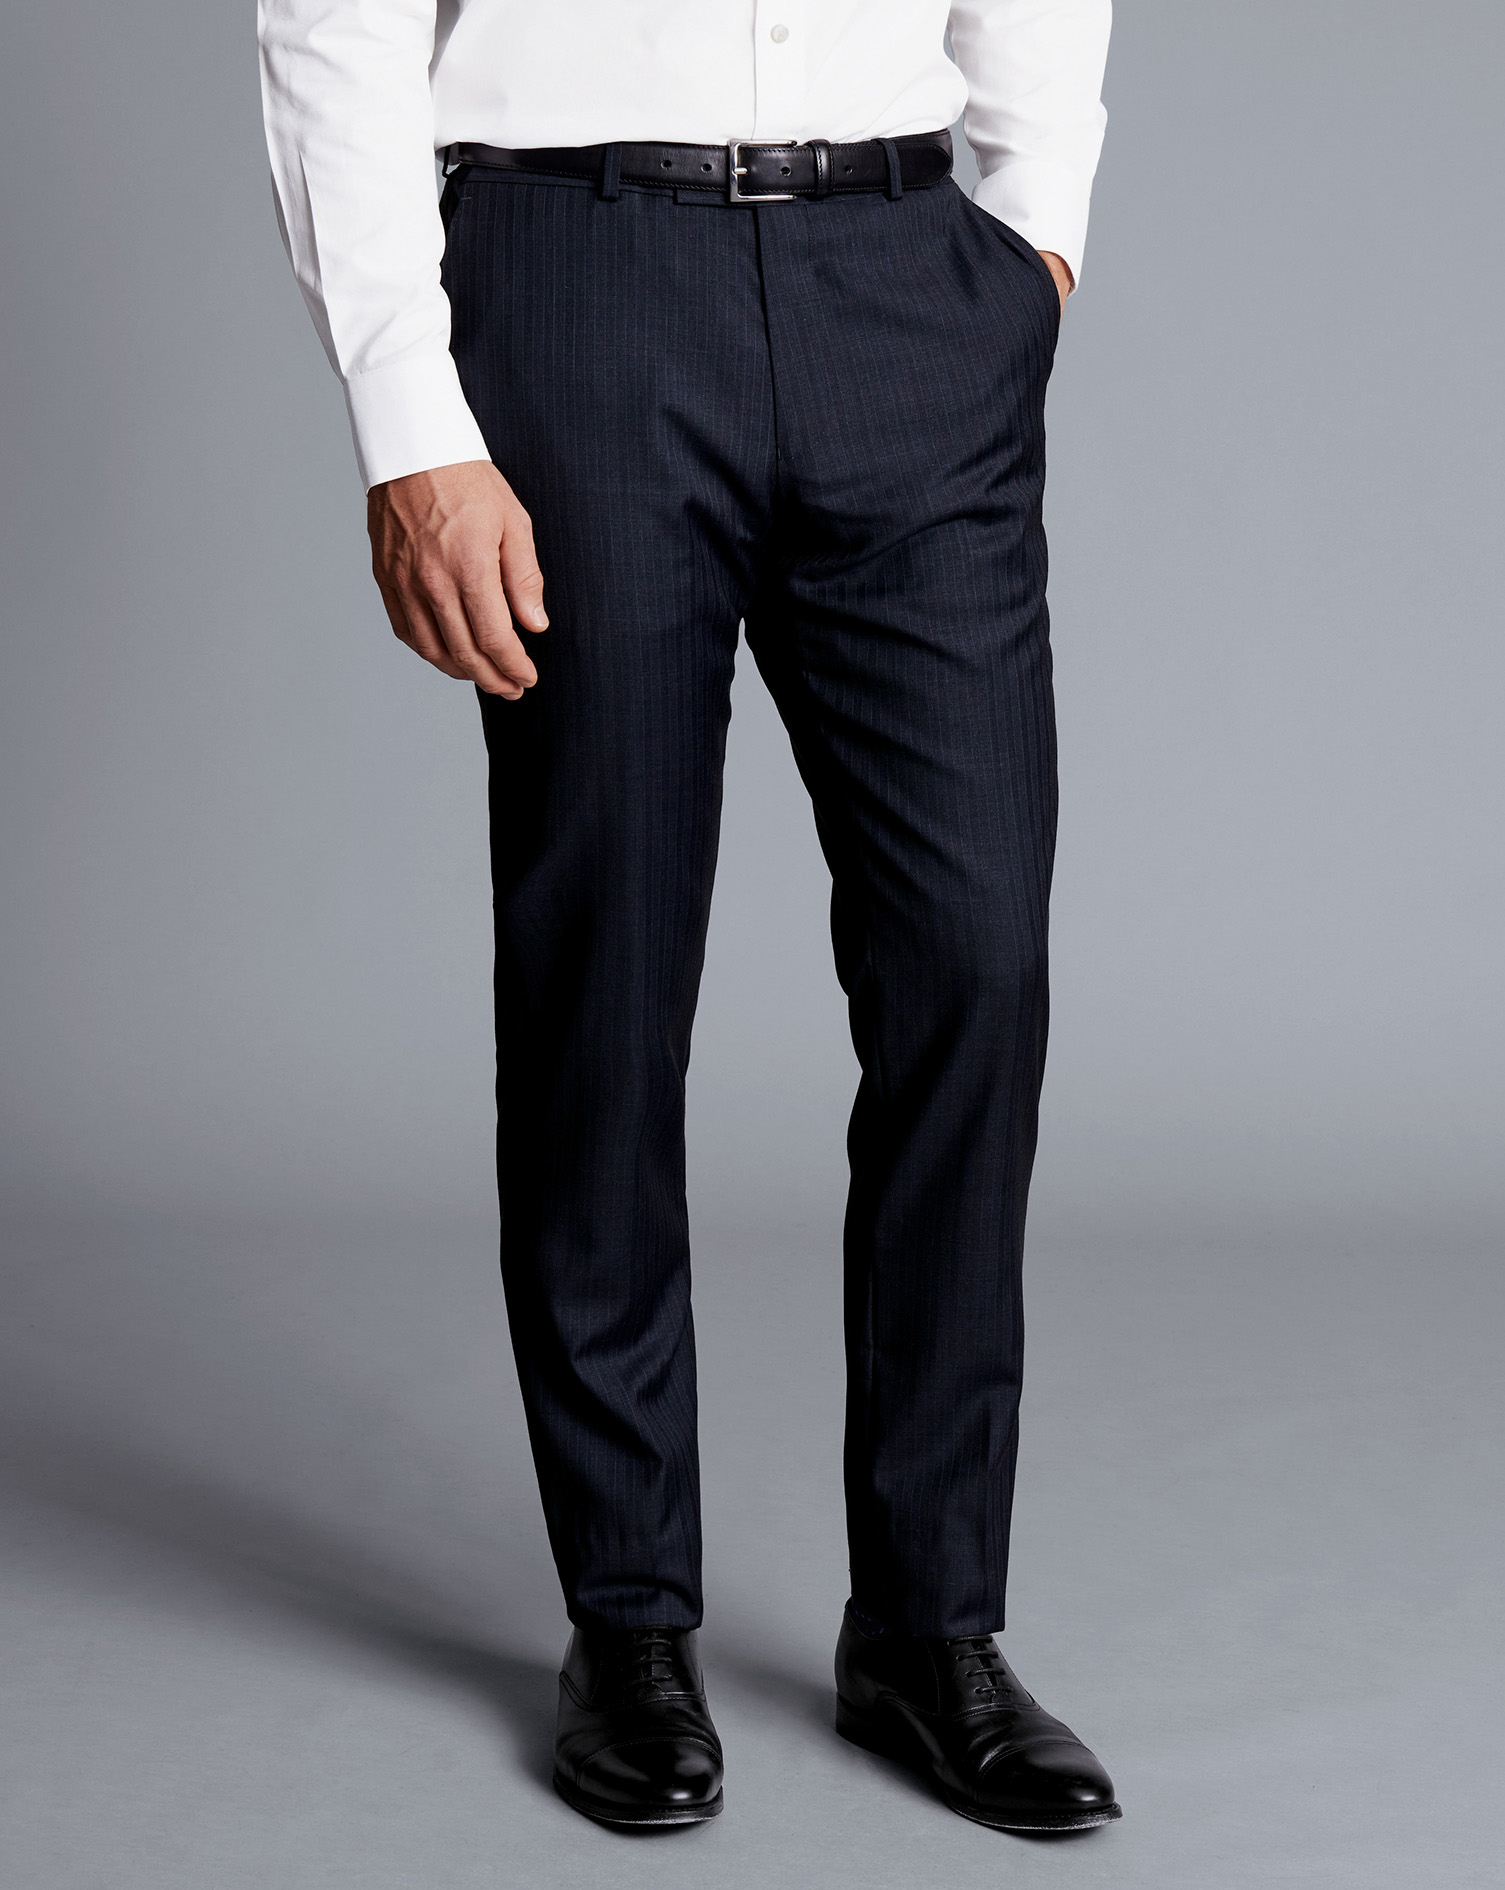 Textured Business Suit Trousers - Dark Grey